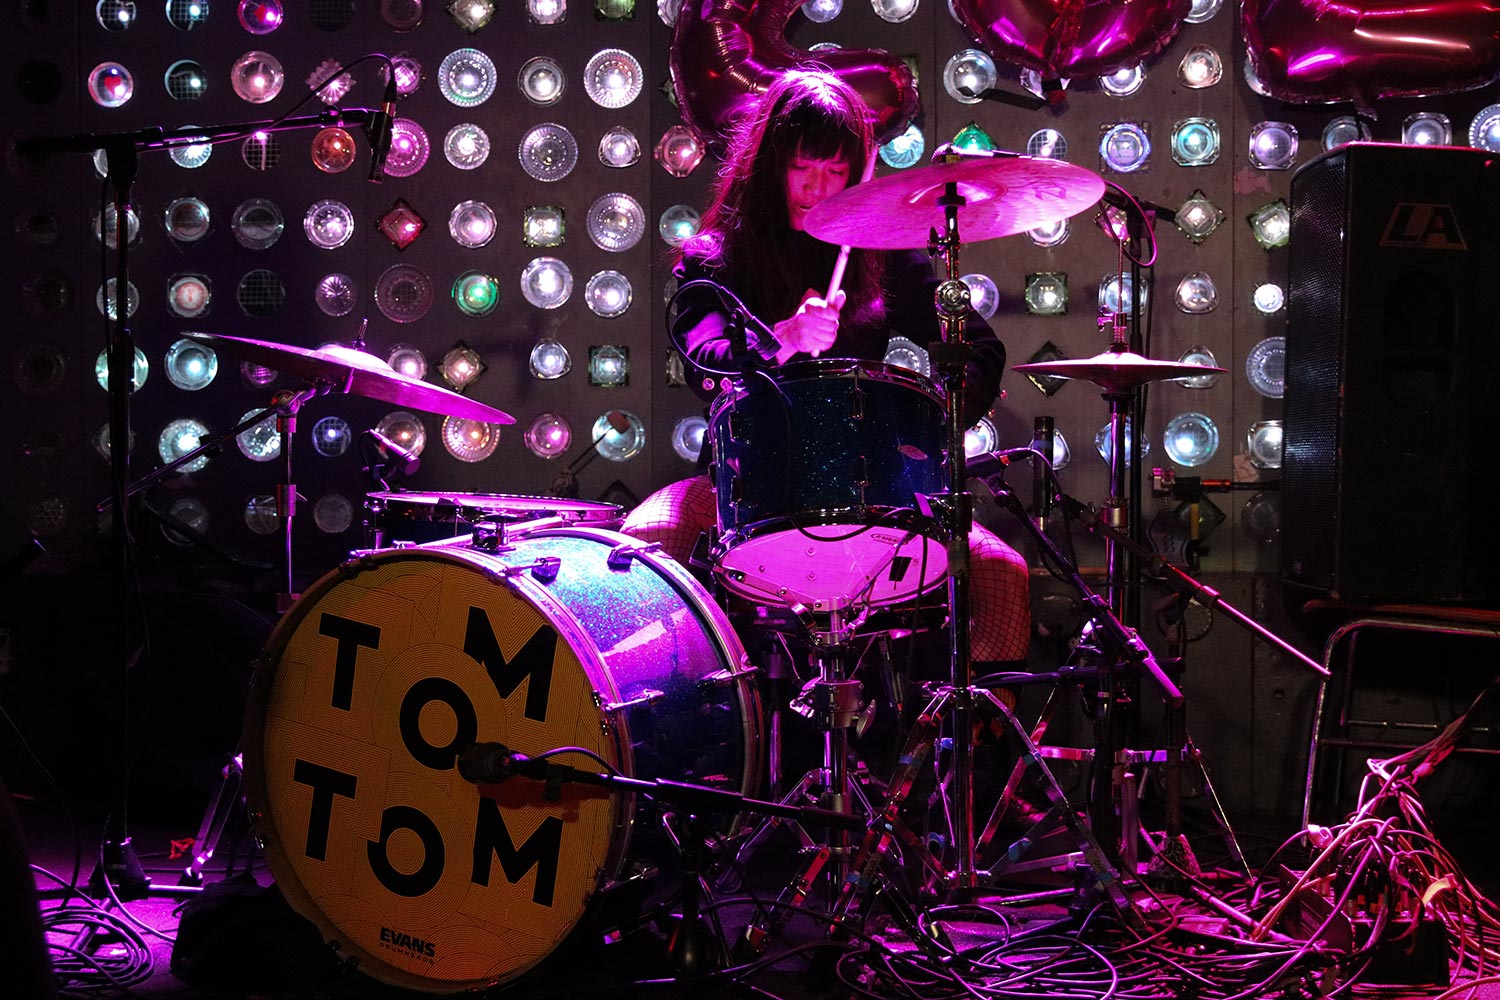 tomtom, female, drummers, magazine, beatmakers, producers, brooklyn, new york city, punk, metal, synth, feminism, music, showcase